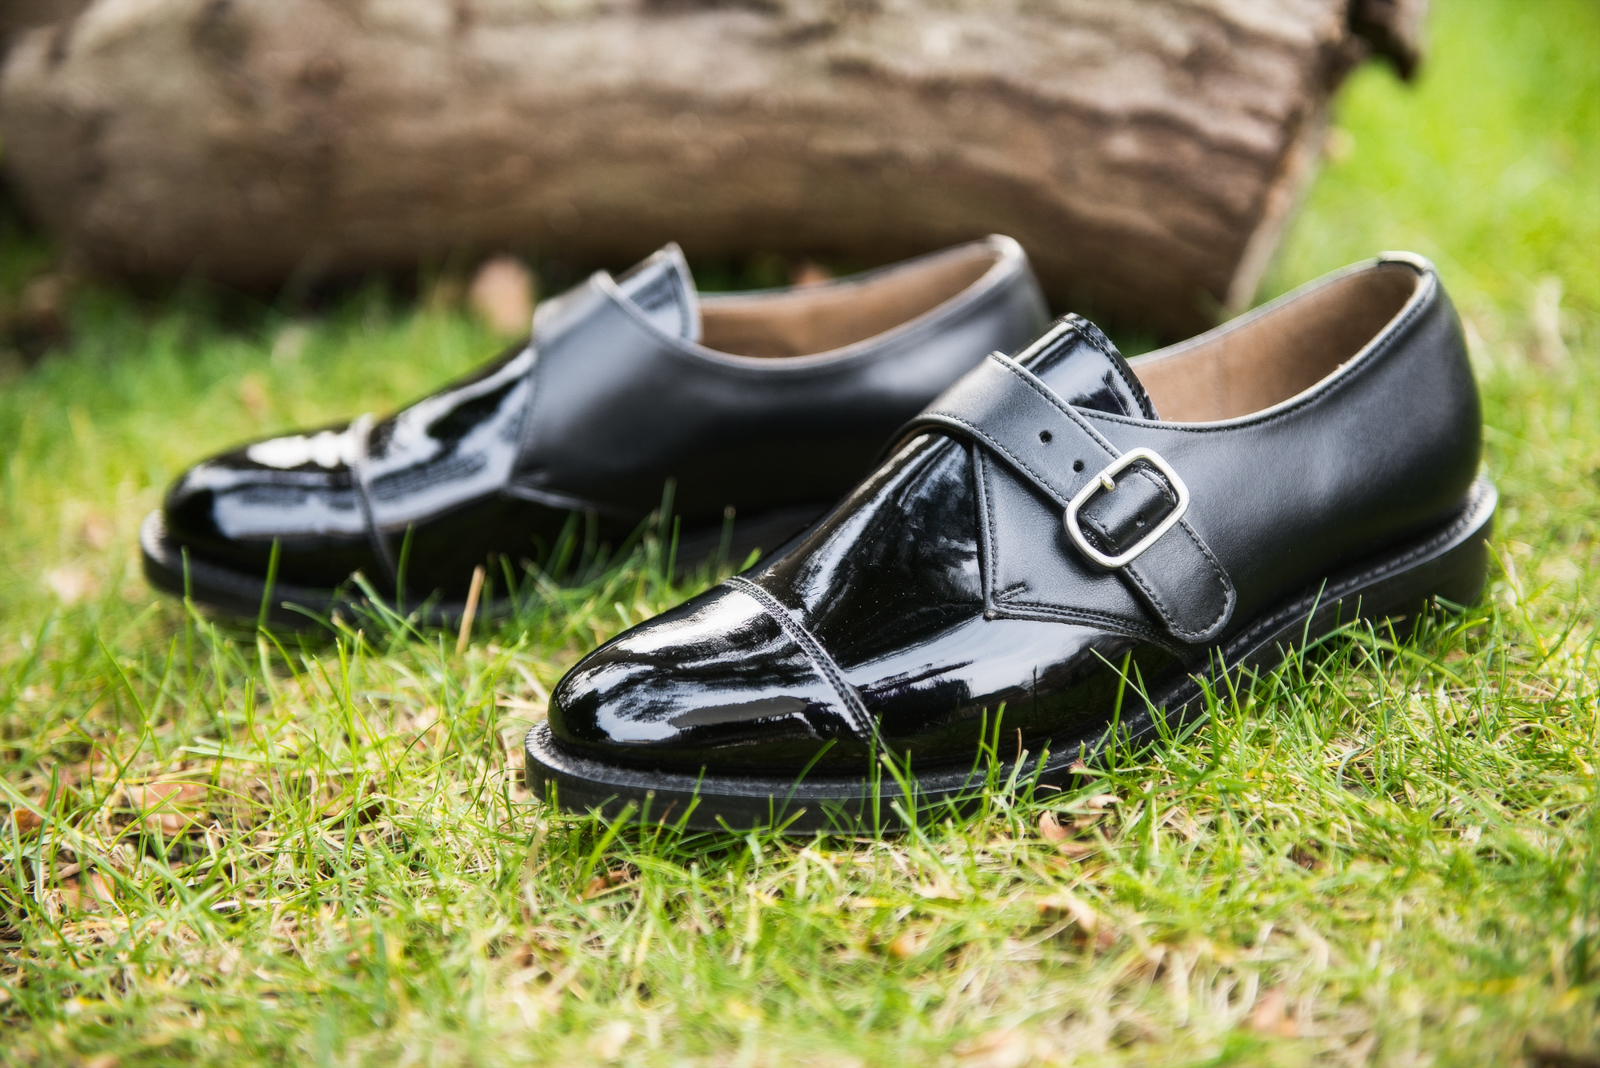 Vyom London - vegan shoes for men and women